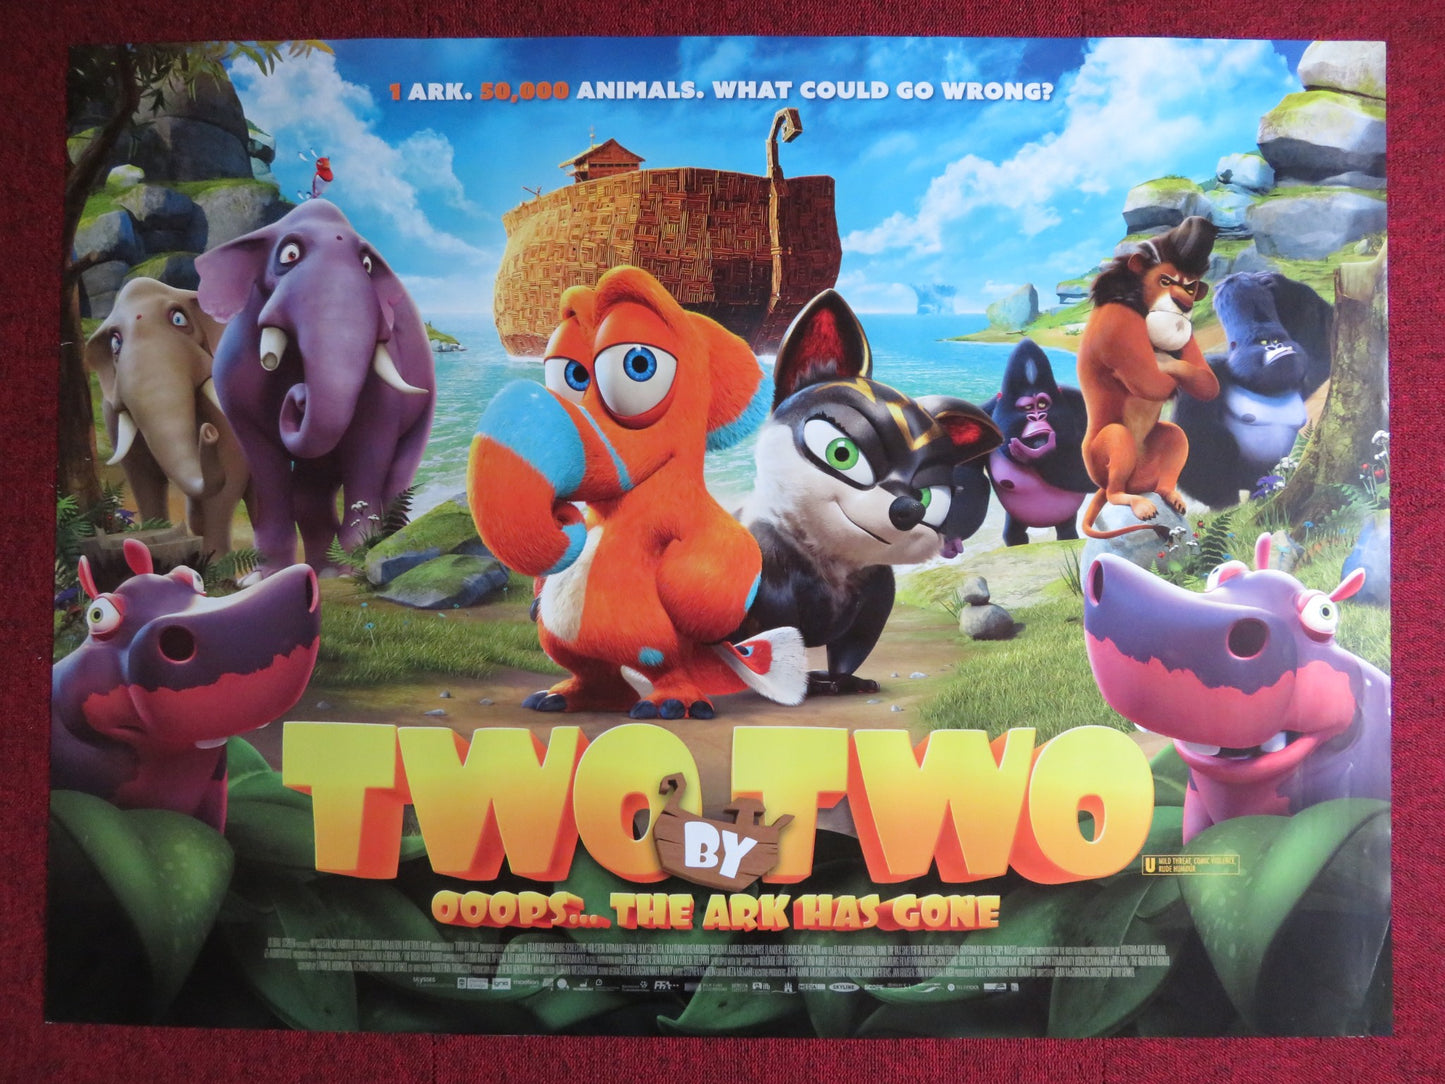 TWO BY TWO UK QUAD (30"x 40") ROLLED POSTER TOBY GENKEL 2015